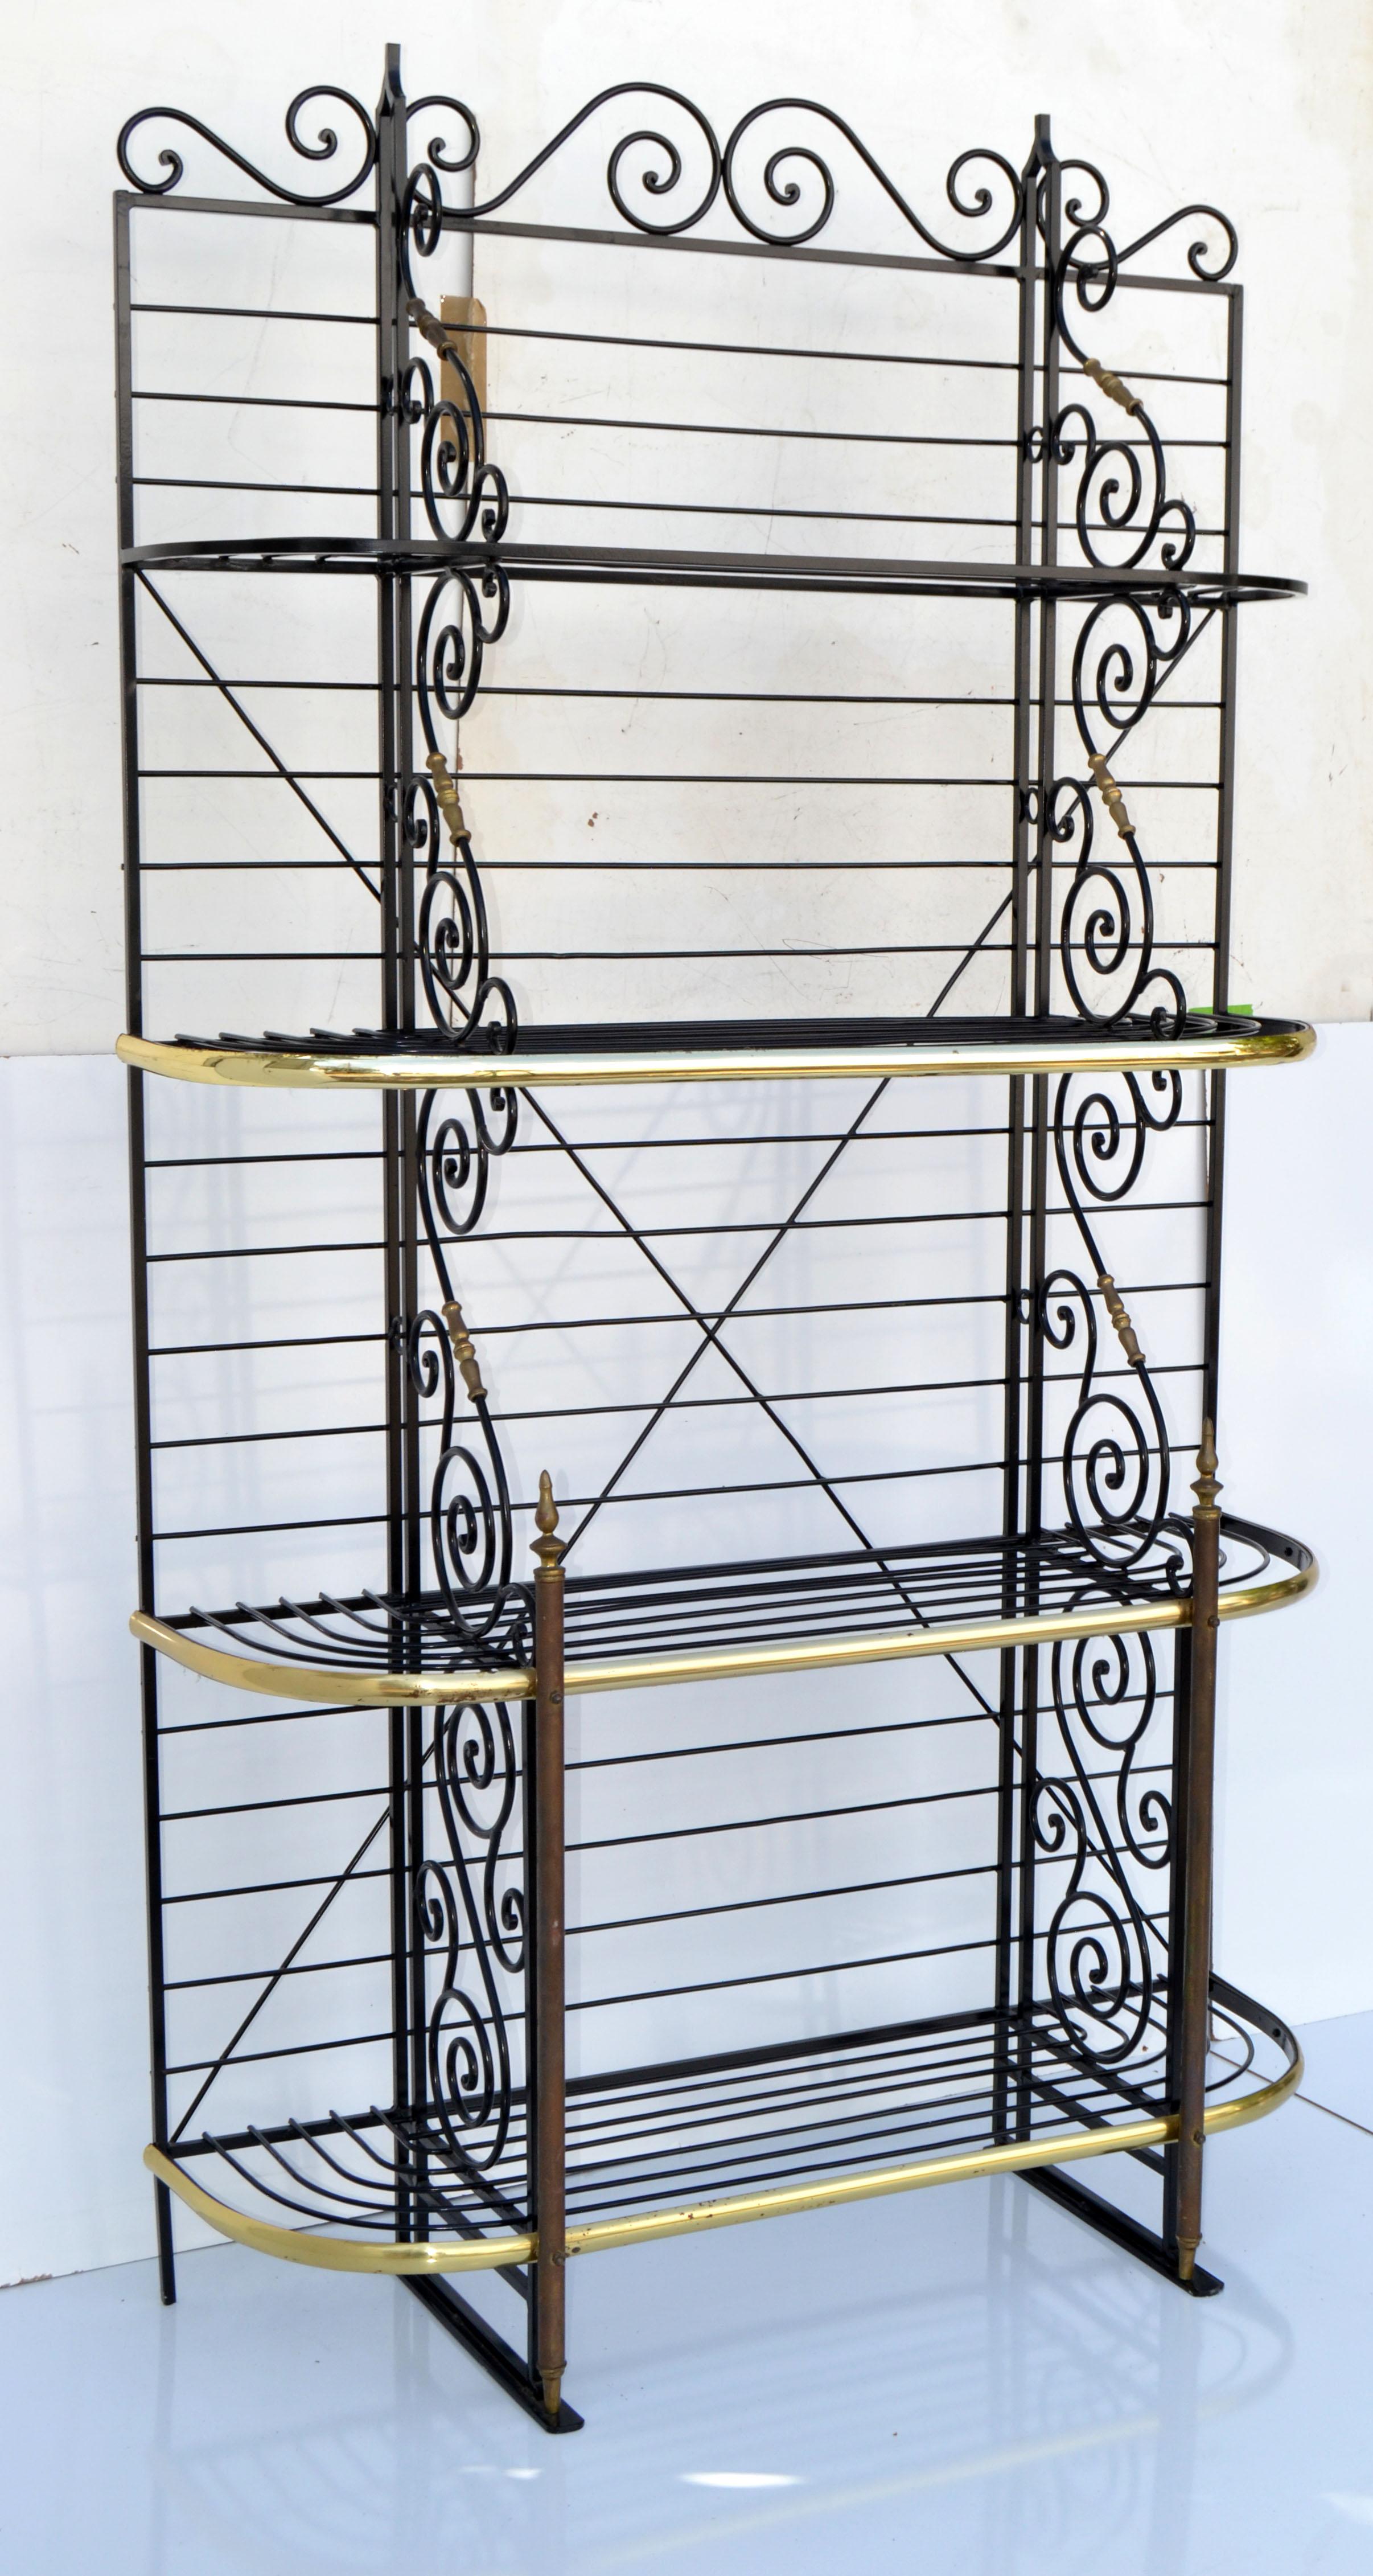 7F3 tall neoclassical 4 tier wrought iron, bronze & brass bakery shelf, Etagere 
The space in between the shelves is 20, 20.5 and 17.25 inches.